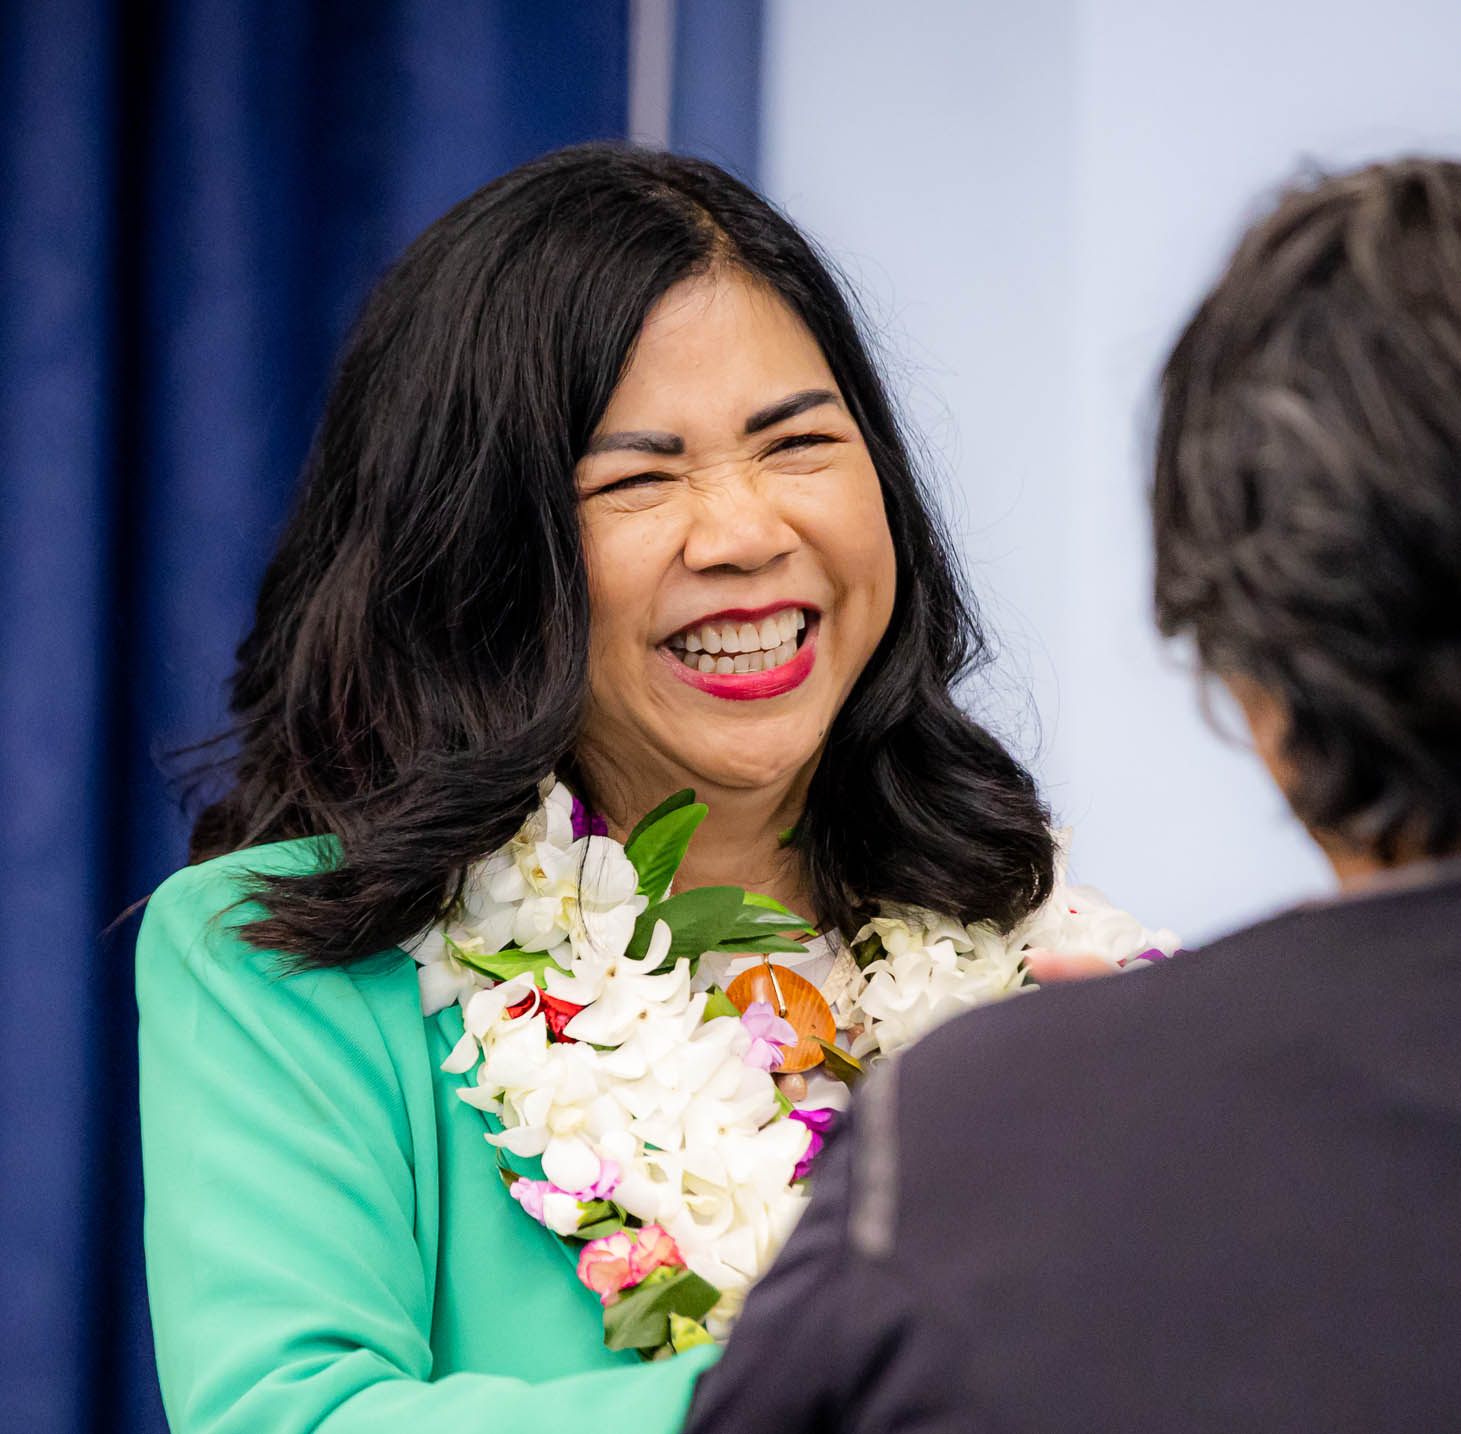 Dr. Anita Borja Enriquez reacts and gets congratulatory greetings following the University of Guam Board of Regents vote on June 22, choosing her as the 12th UOG president.